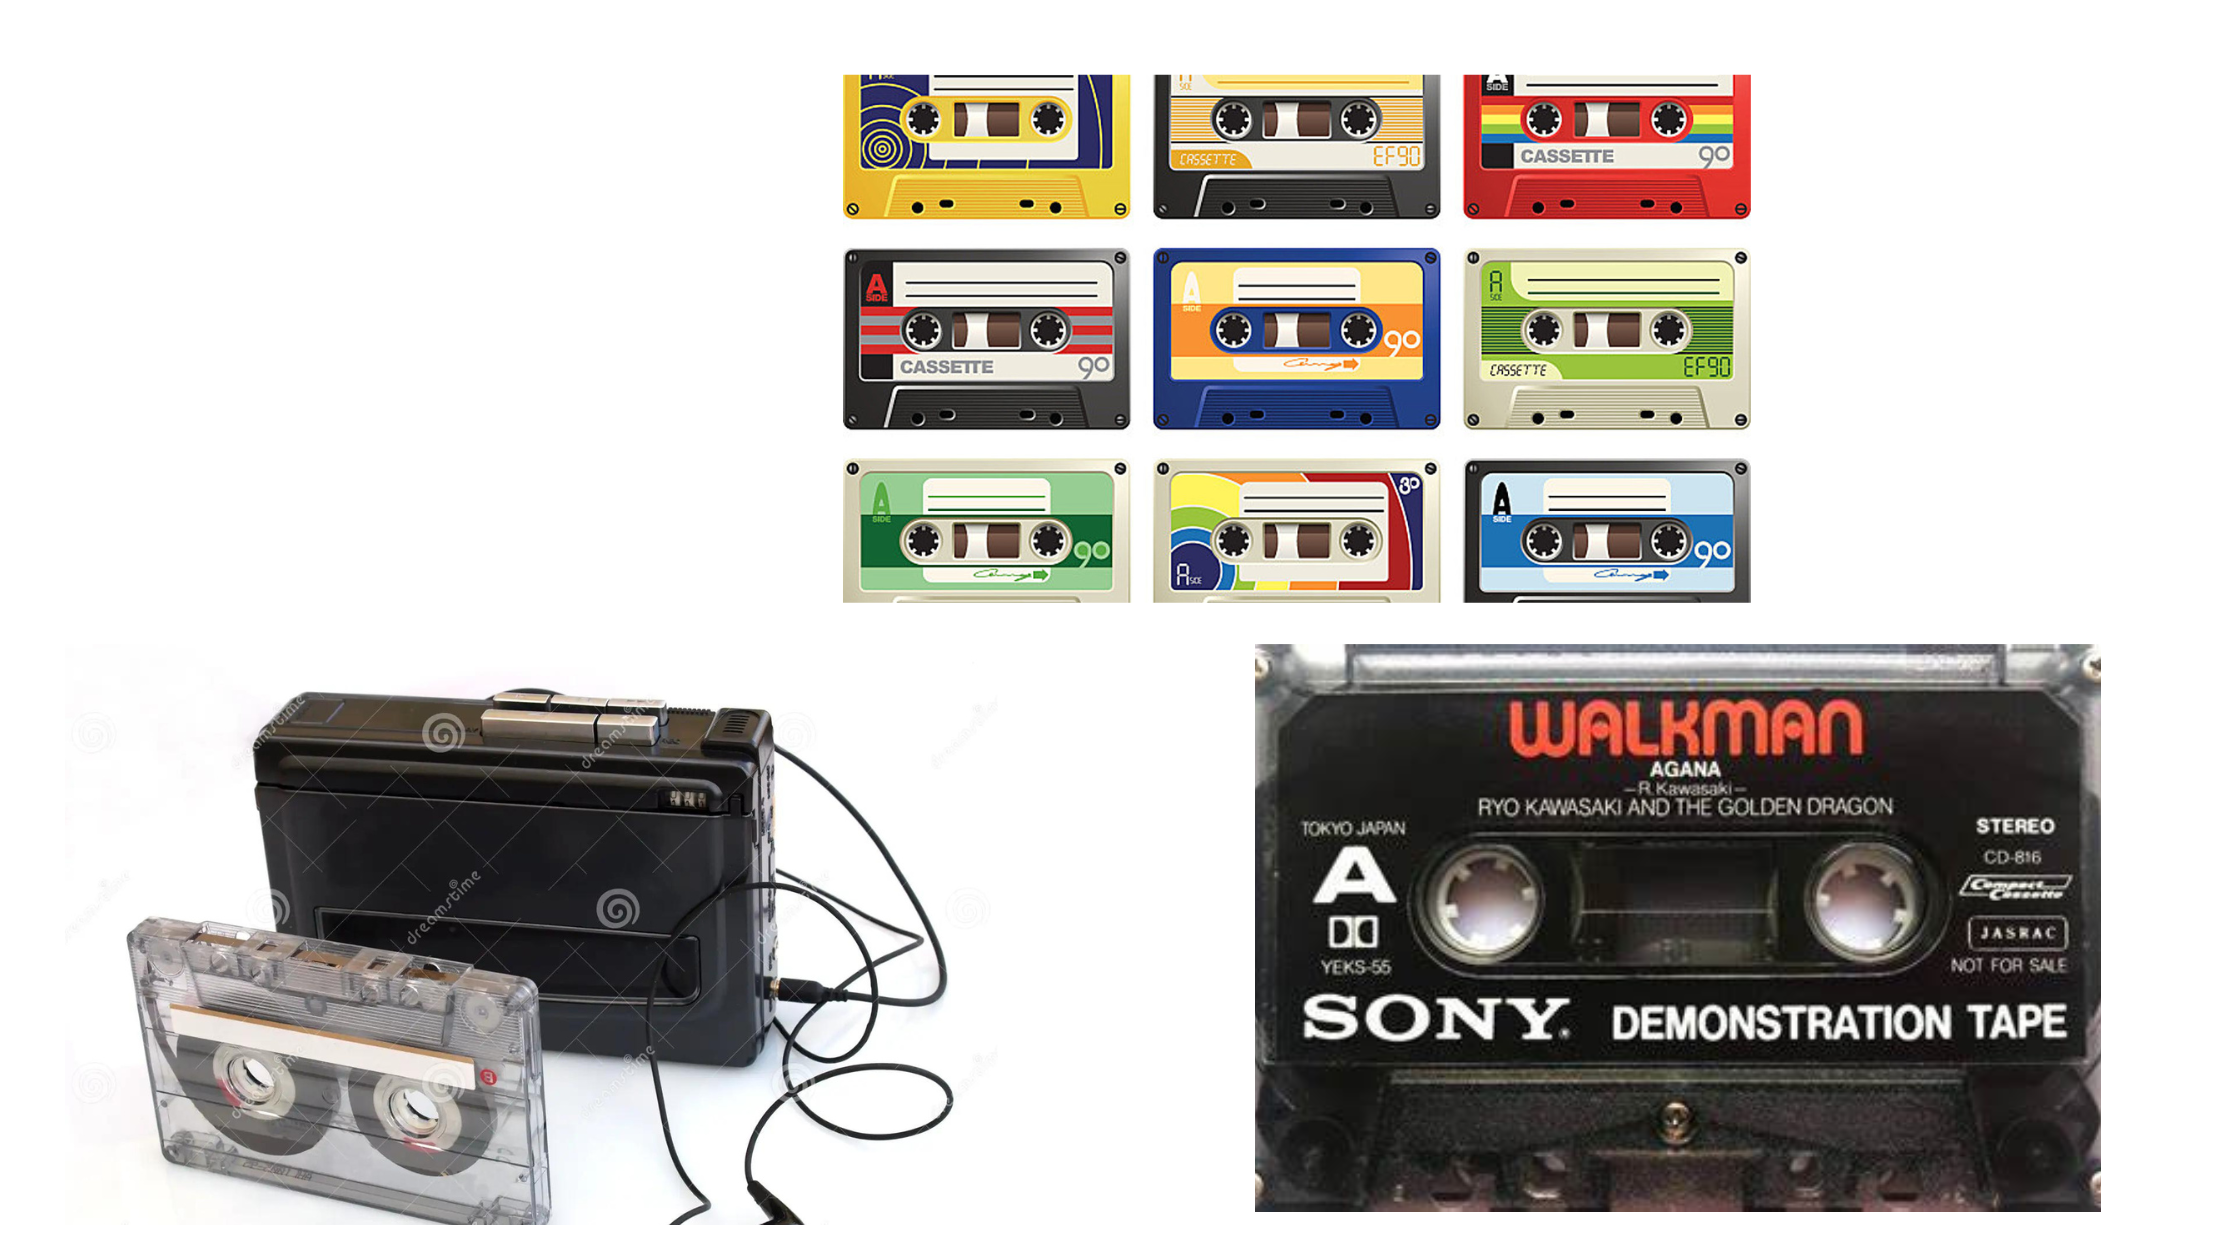 Walkman and Cassette tapes